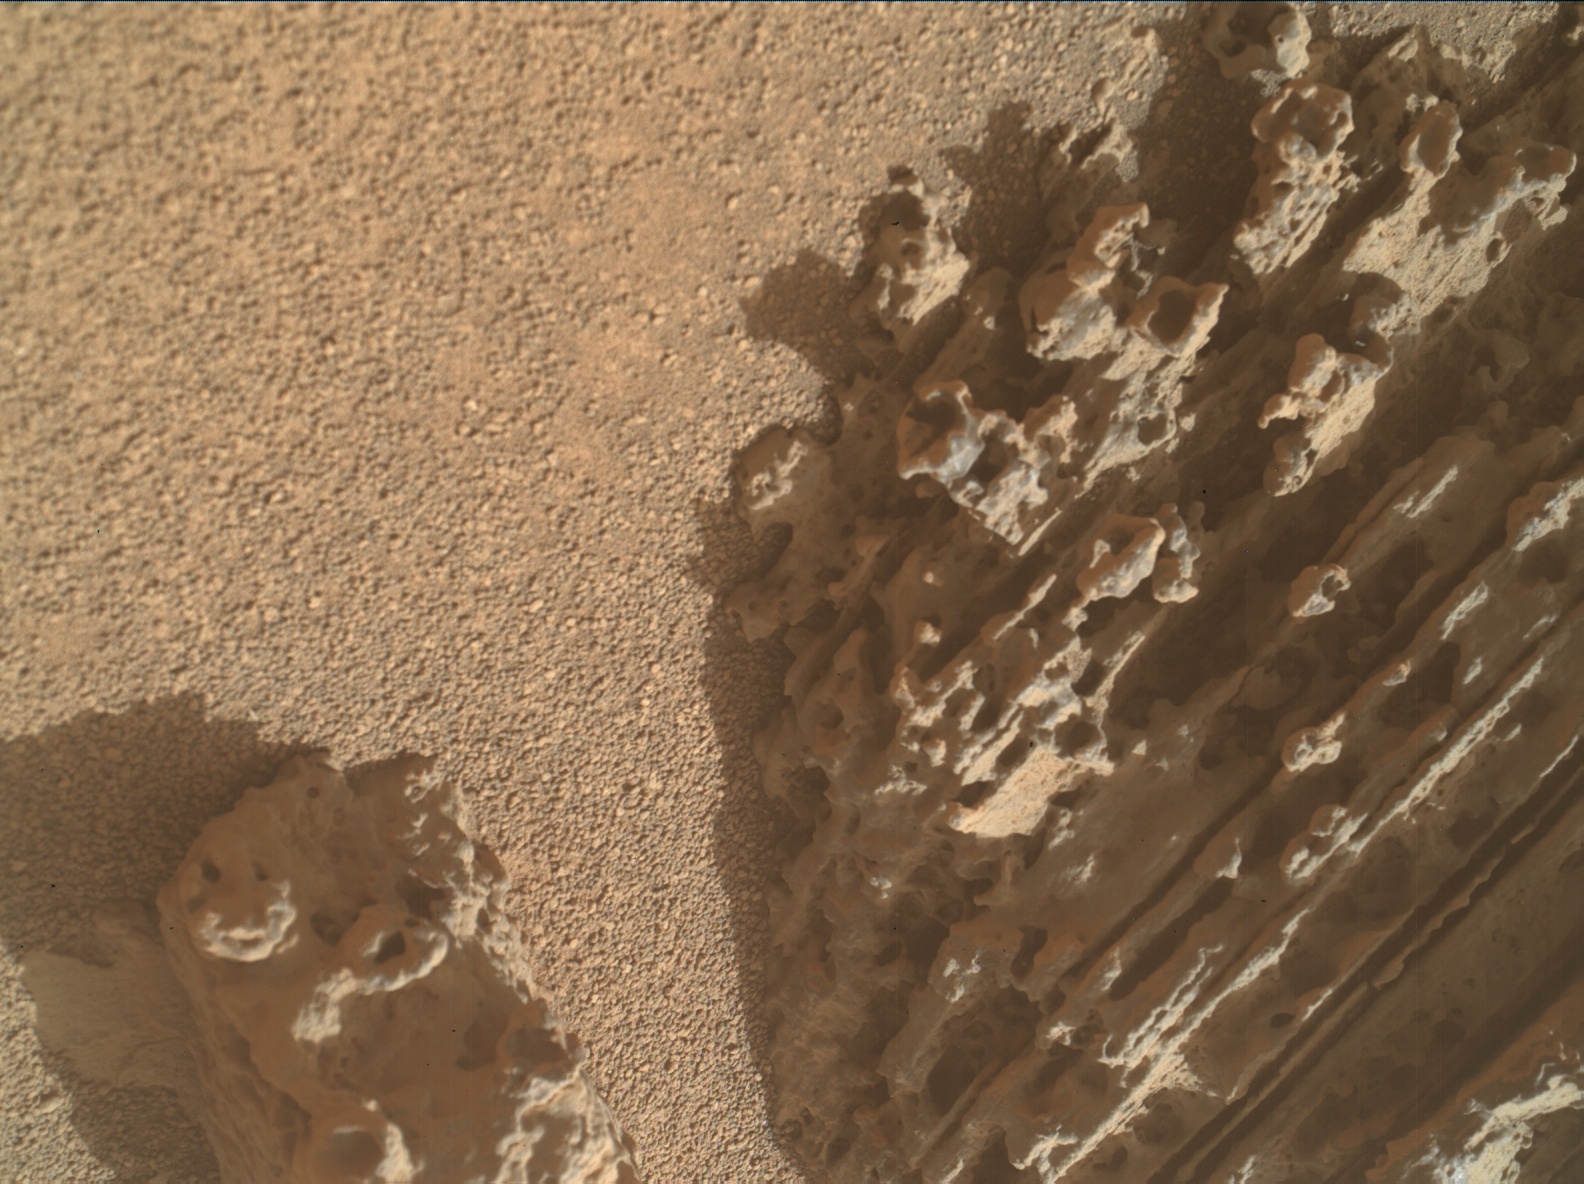 Nasa's Mars rover Curiosity acquired this image using its Mars Hand Lens Imager (MAHLI) on Sol 3689